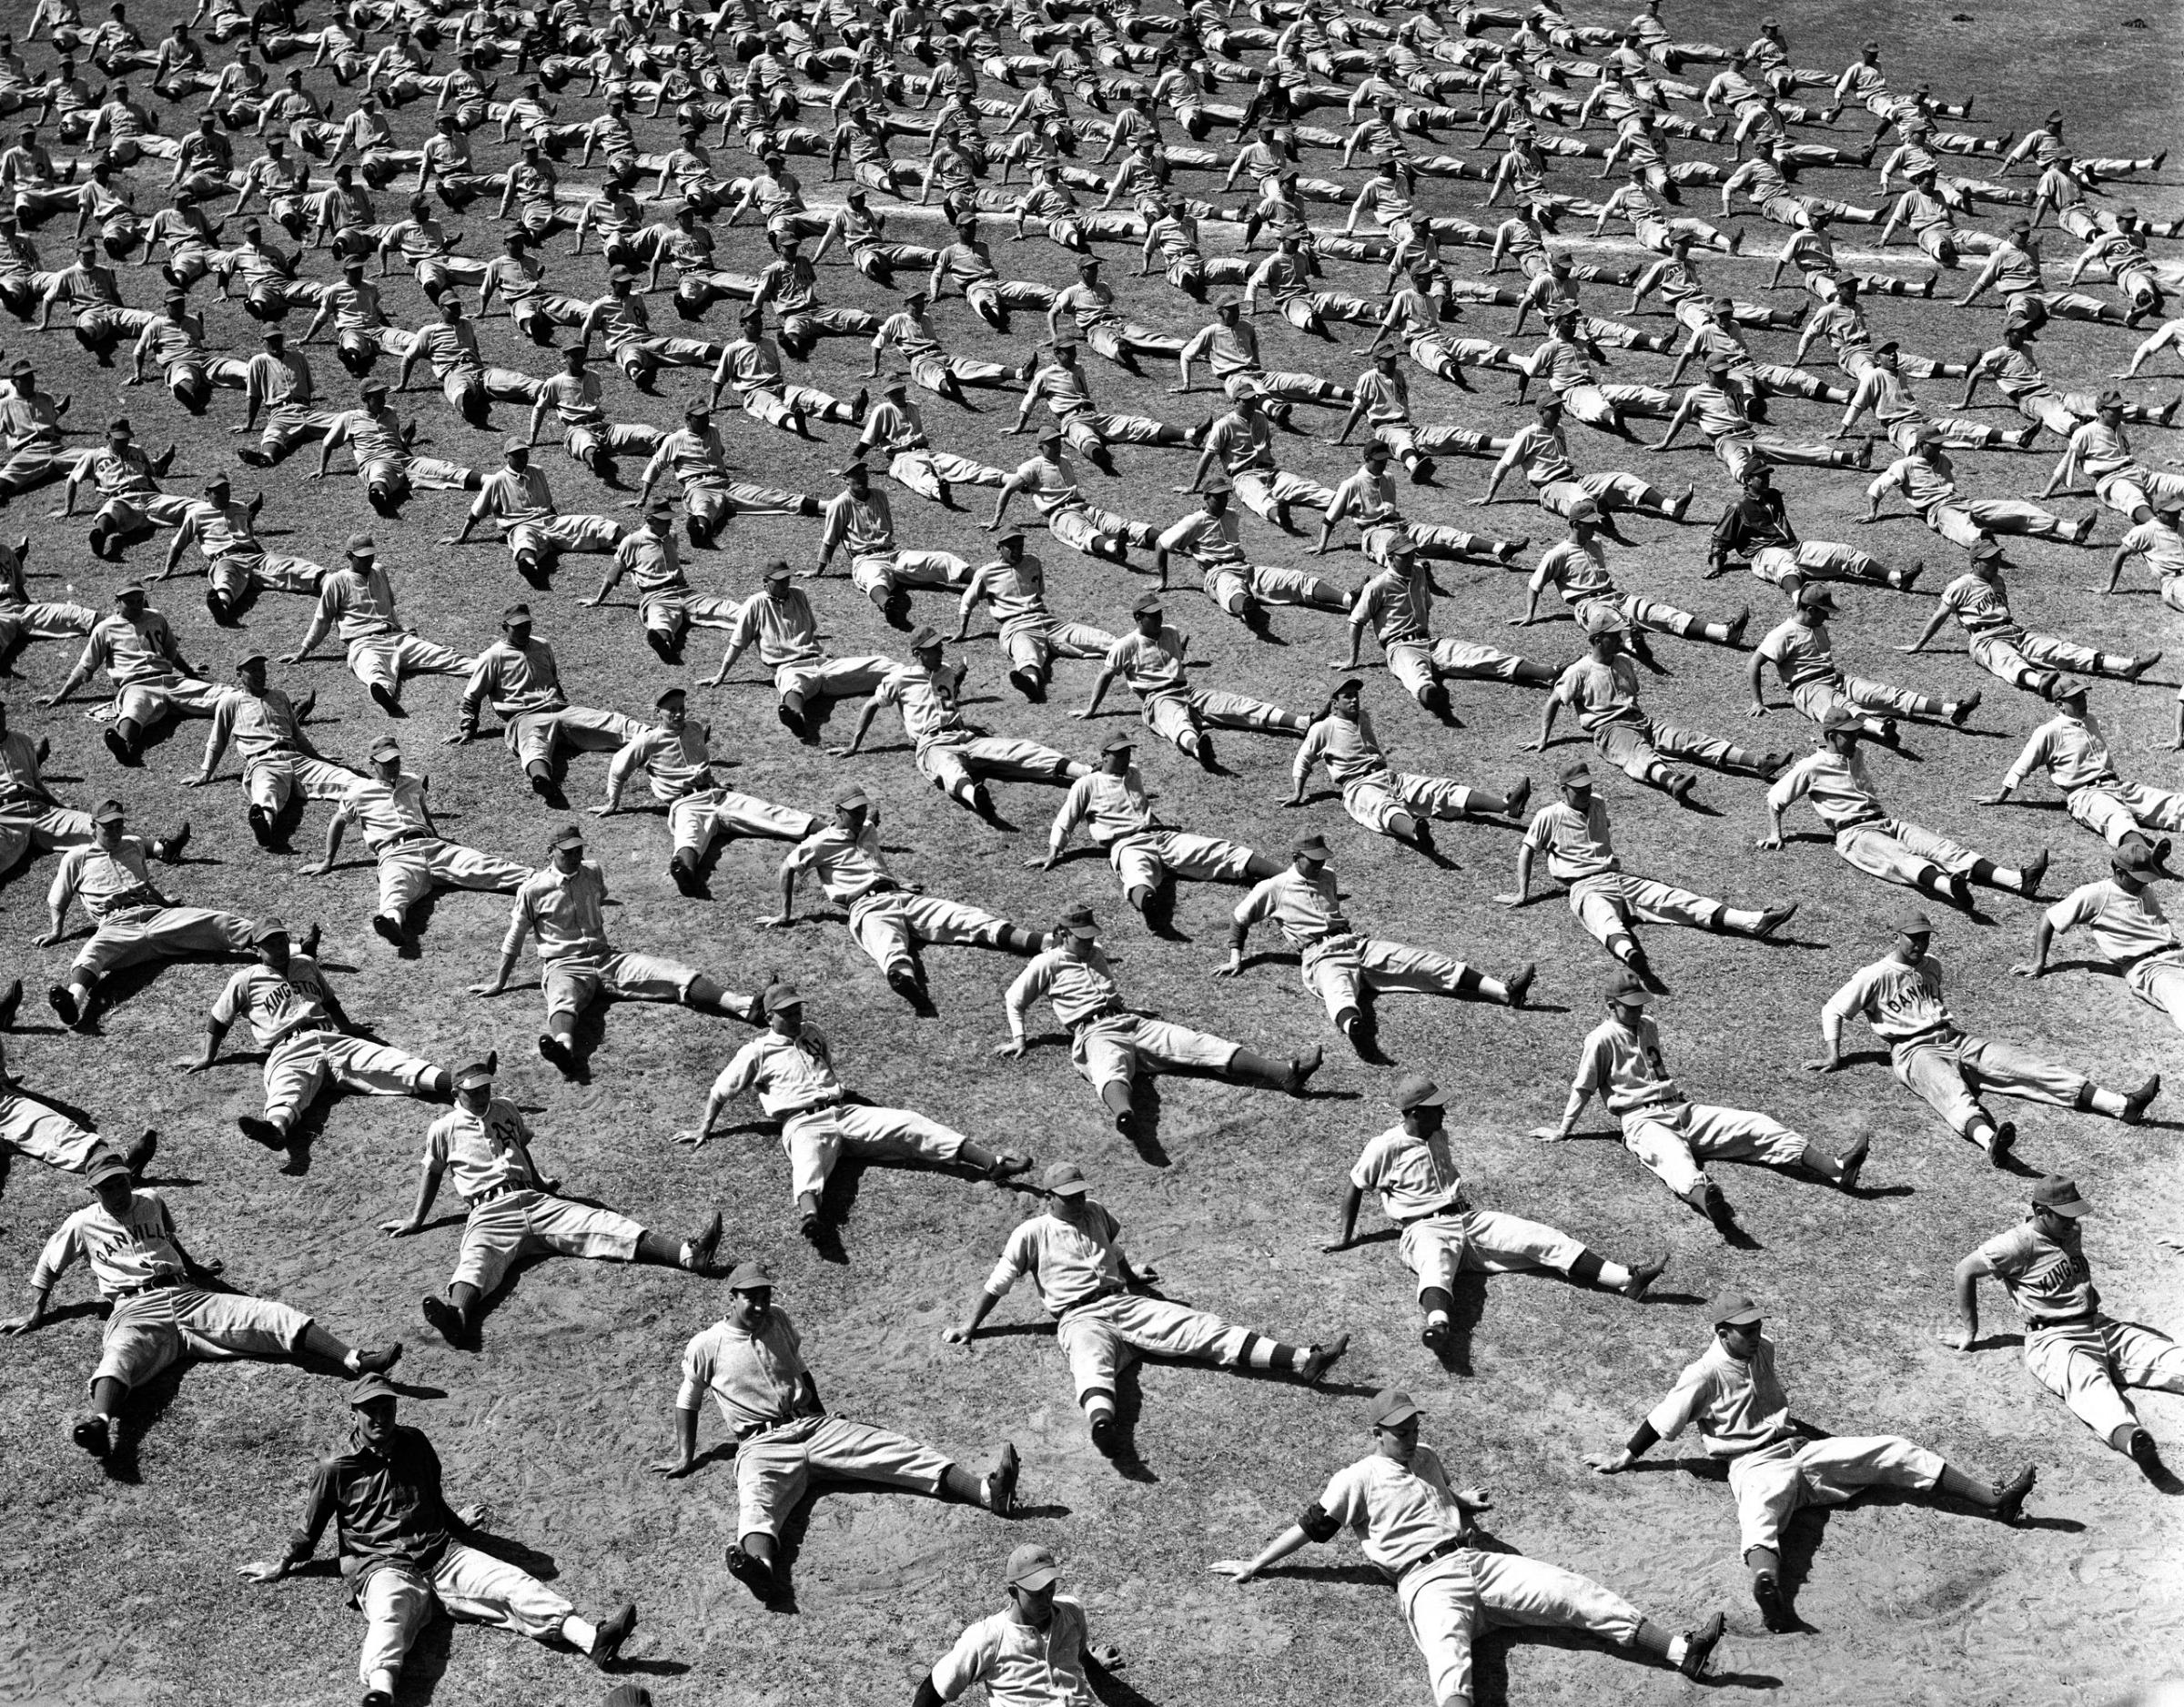 Brooklyn Dodger rookies and prospects do calisthenics as part of daily training routine, Vero Beach, Fla., 1948.